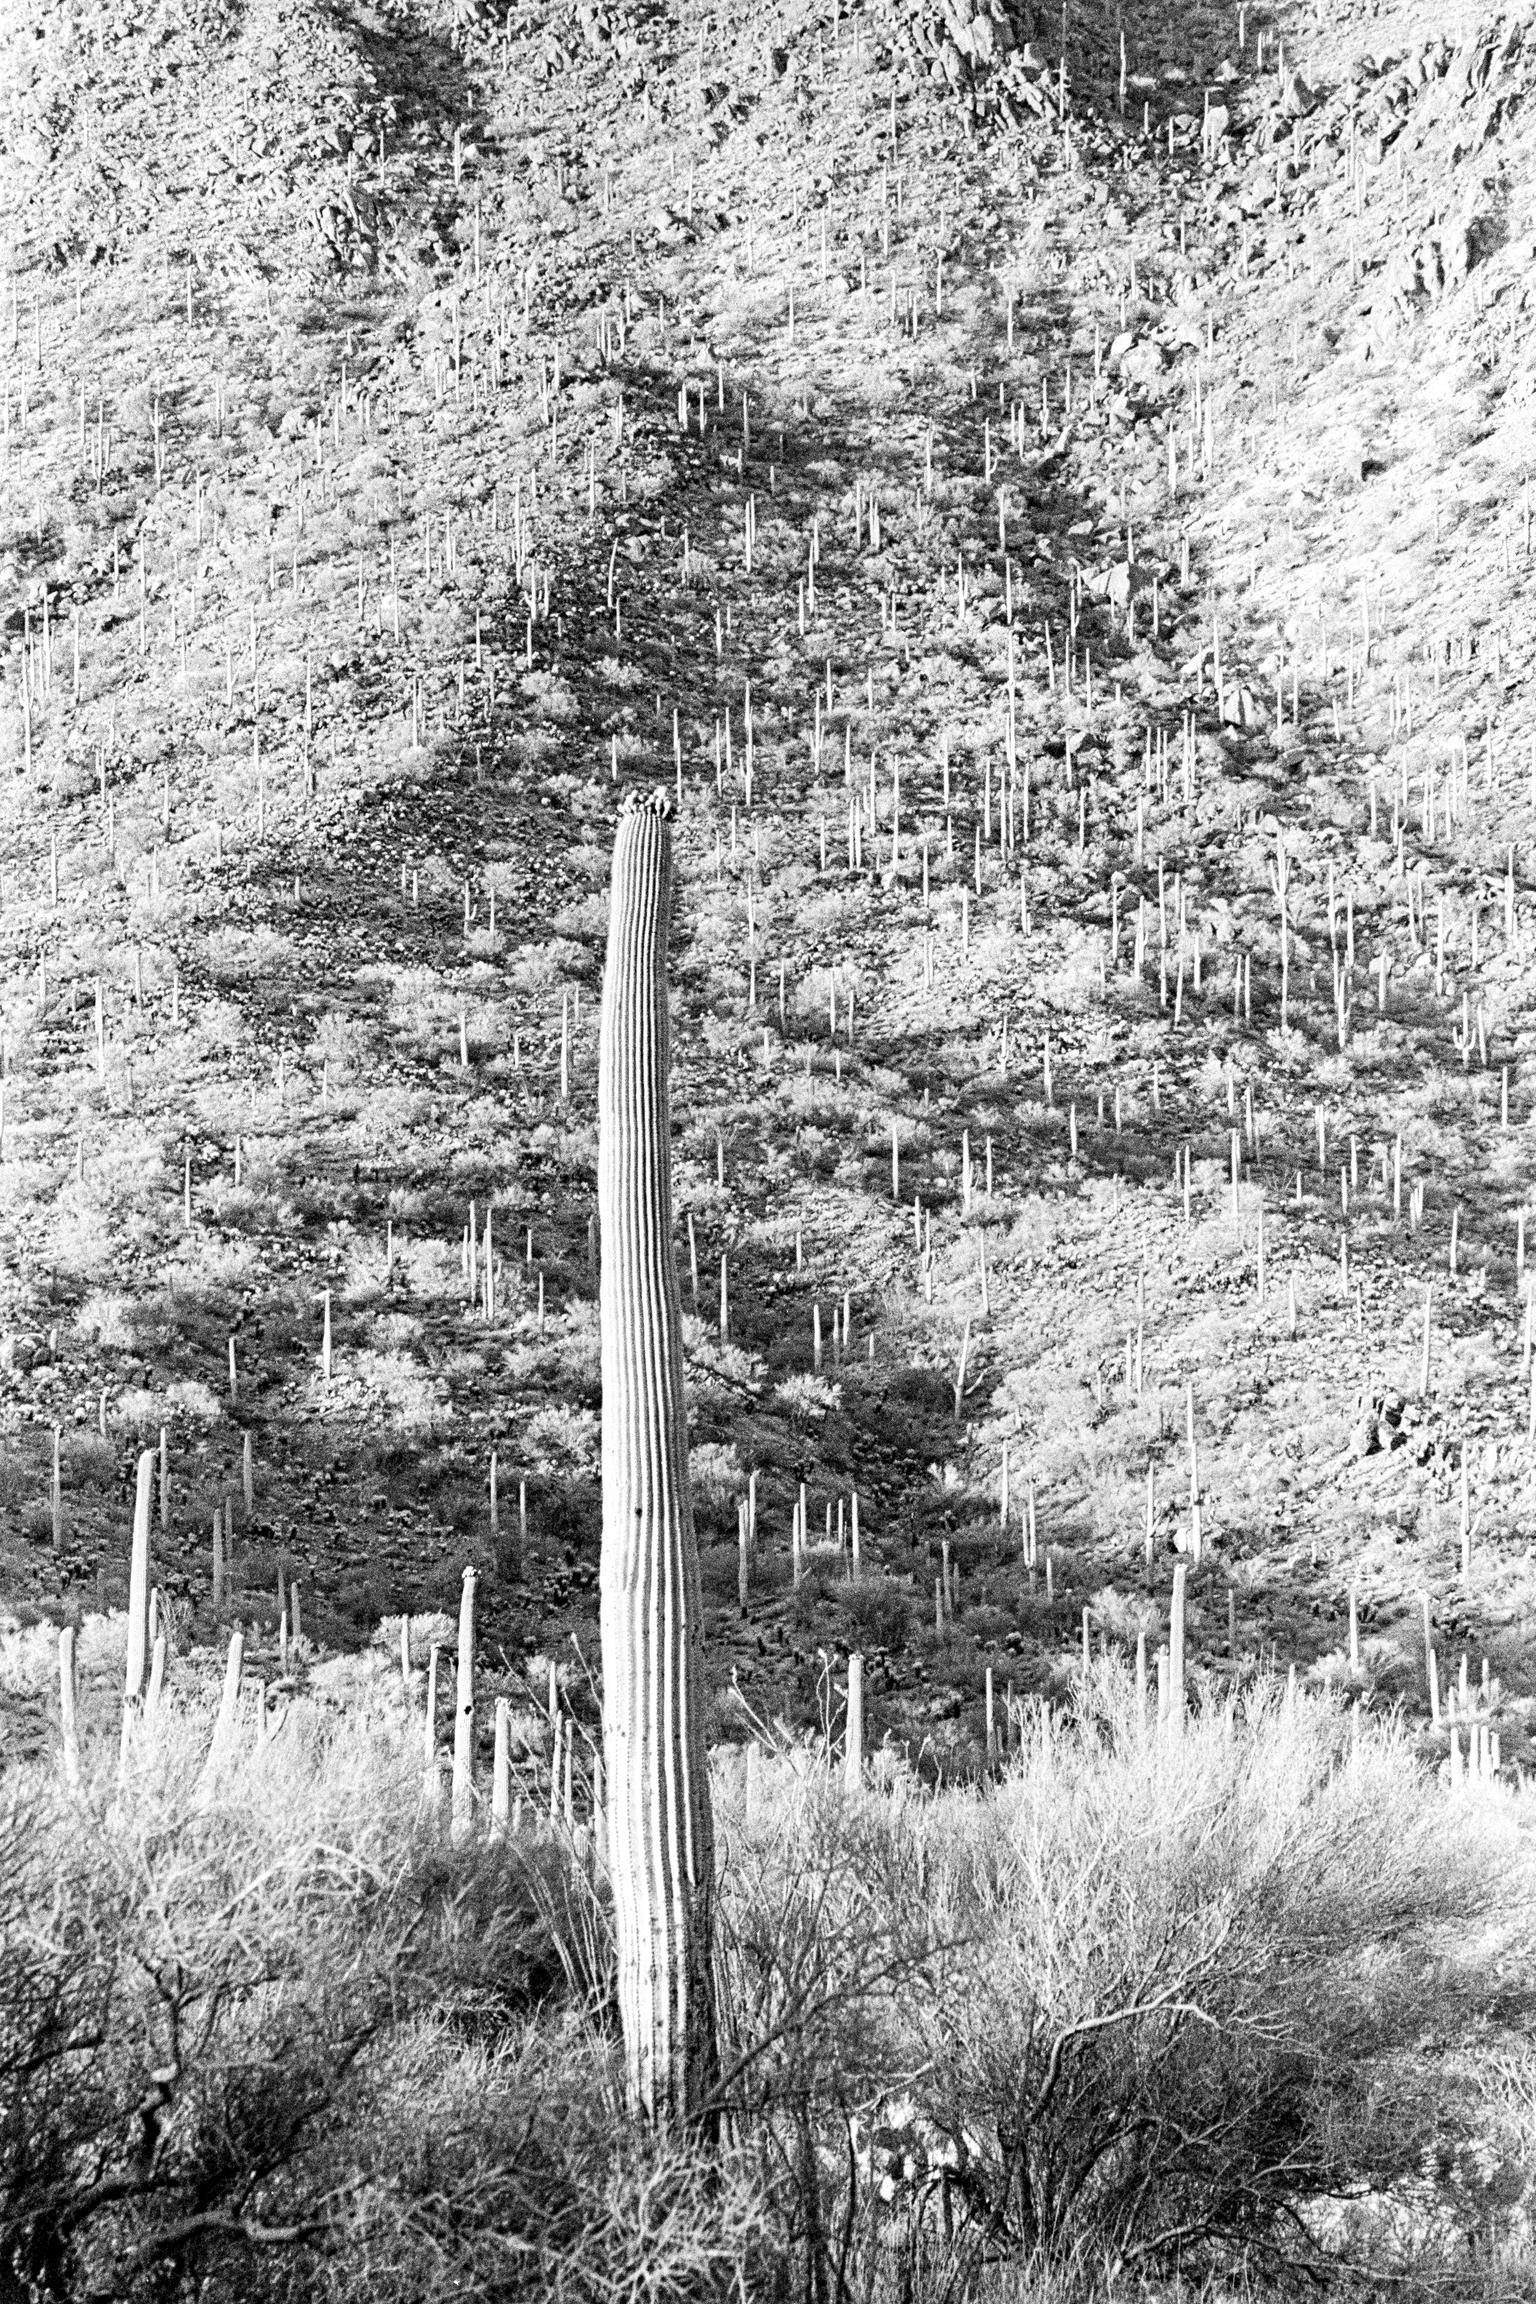 Saguaro cactus is a native of the Sonoran Desert, they can grow to over 20 meters tall. A saguaro without arms is called a spear. Sonoran Desert, Arizona USA